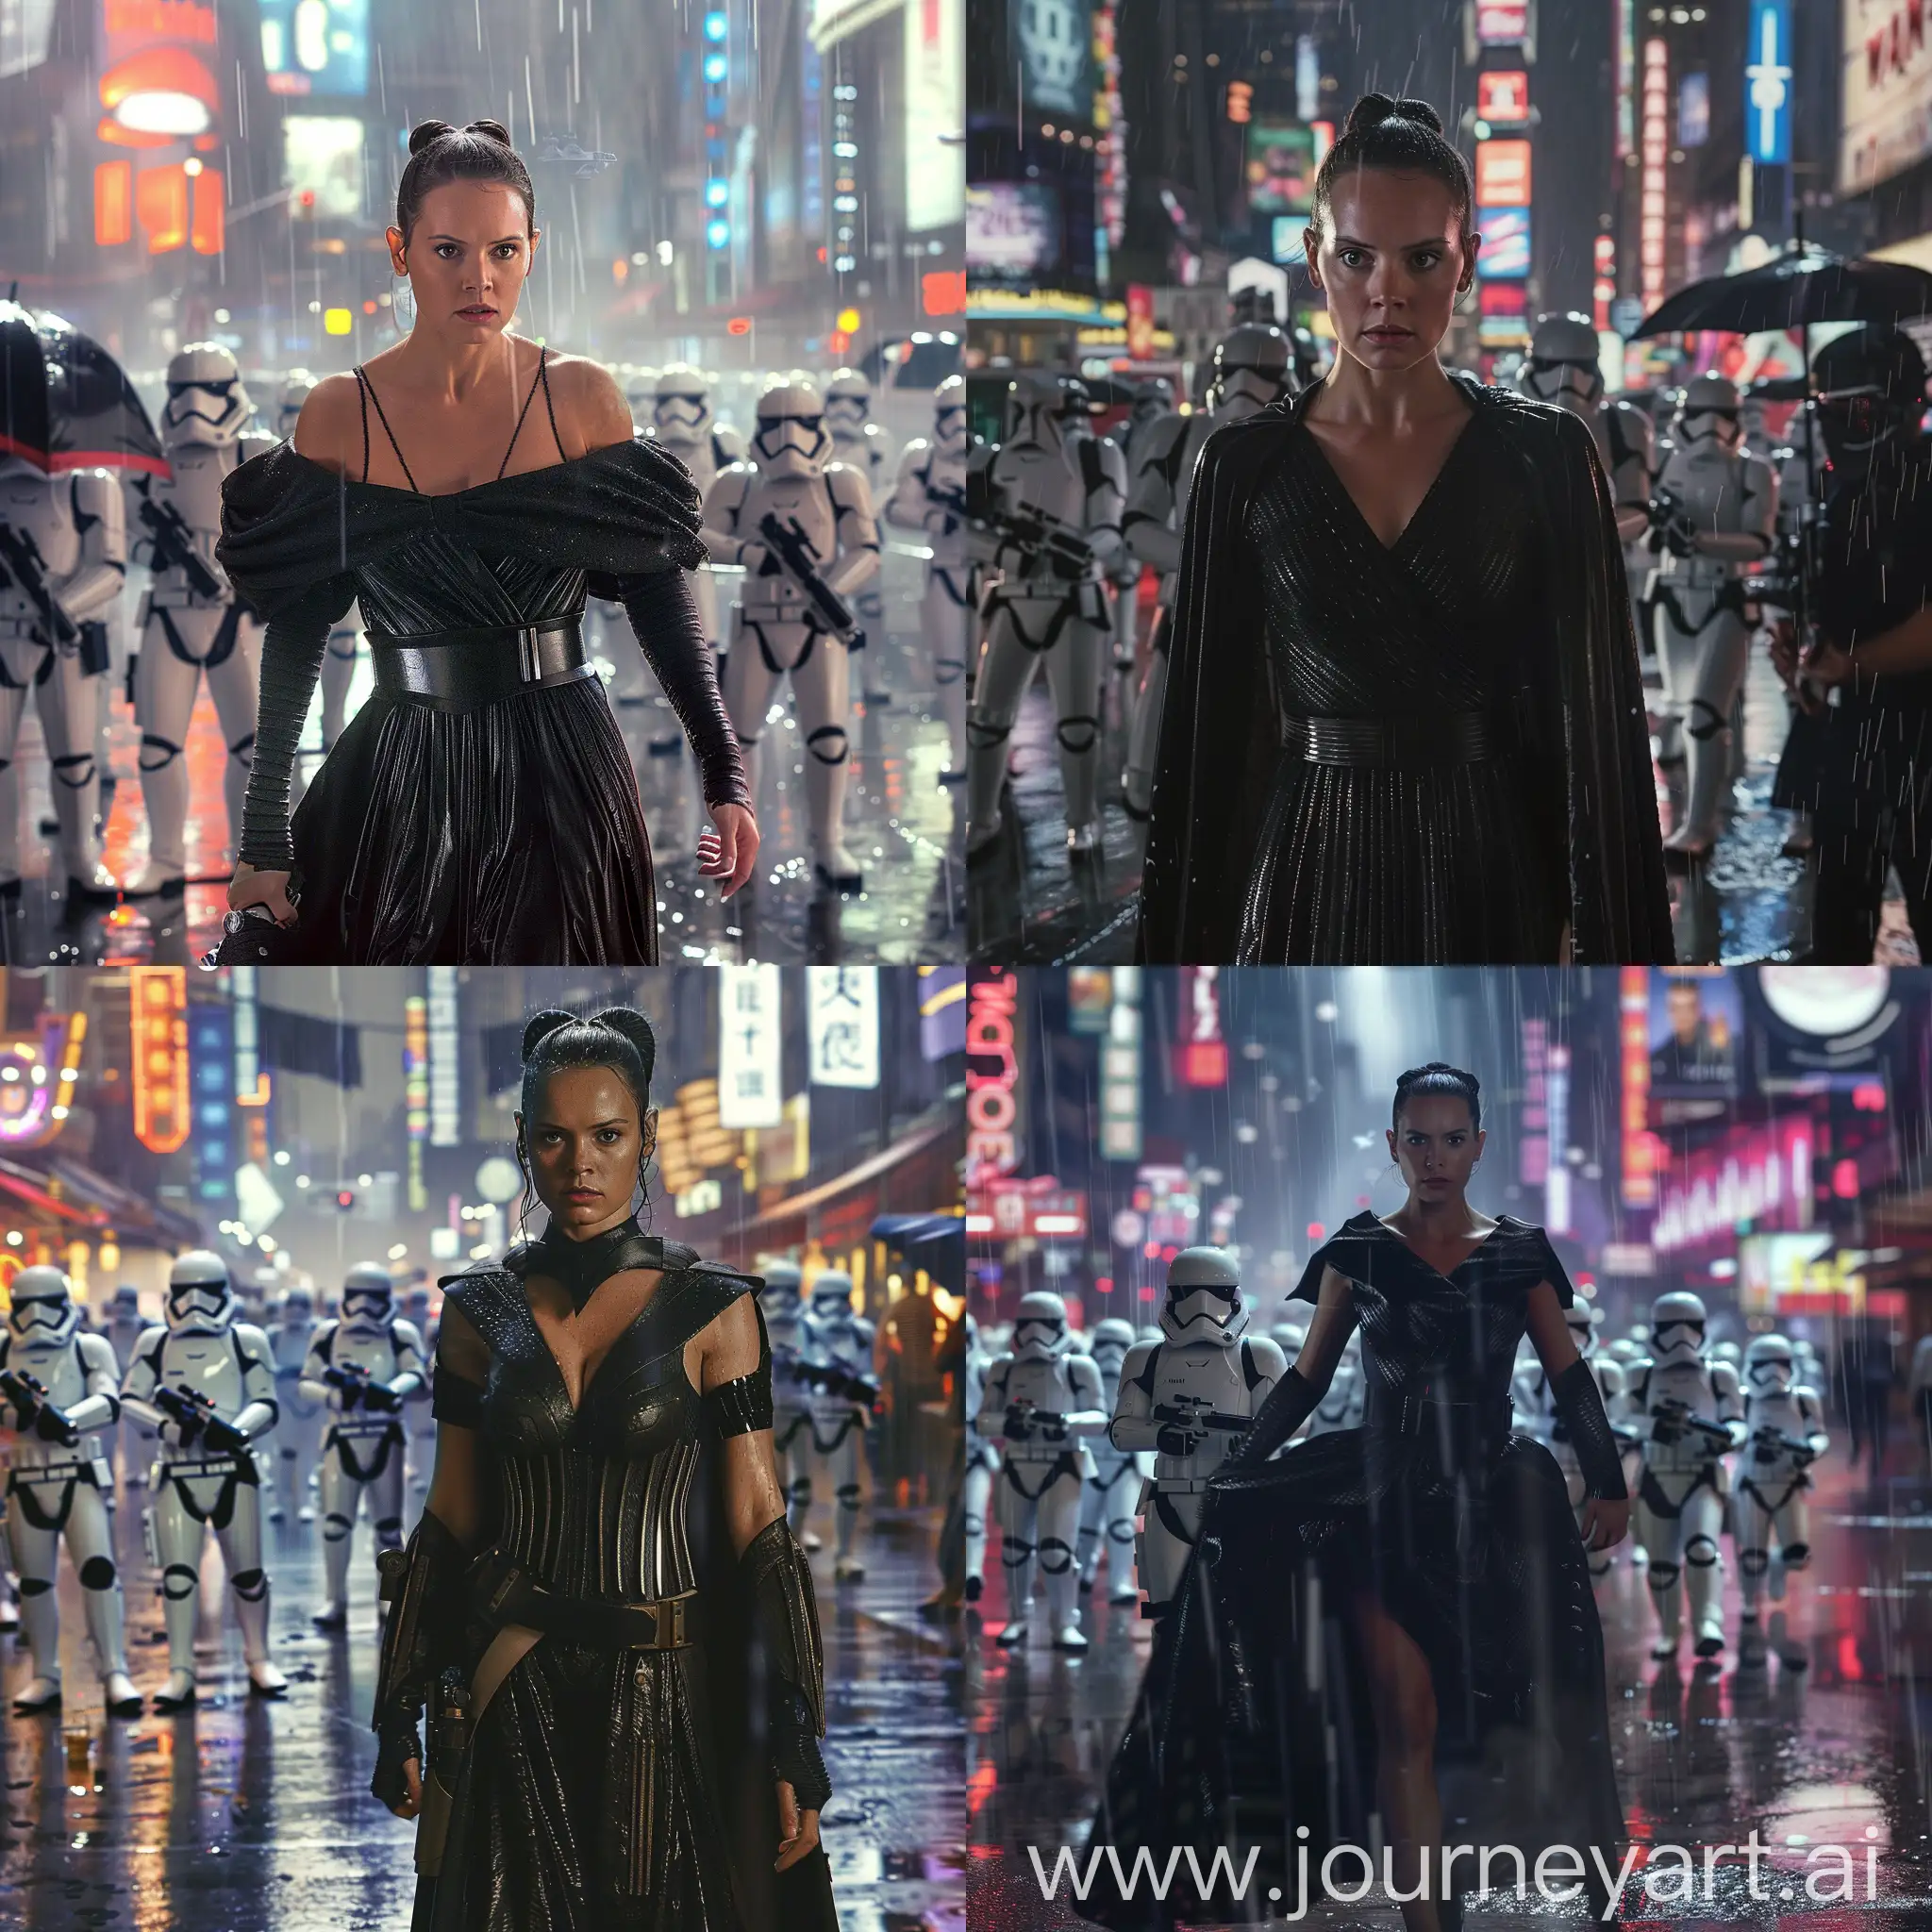 Rey Skywalker in black kryptonian costume of Faora in Man of steel Movie in rain city Tonight in action in cyberpunk city,  With an army of stormtroopers in background 